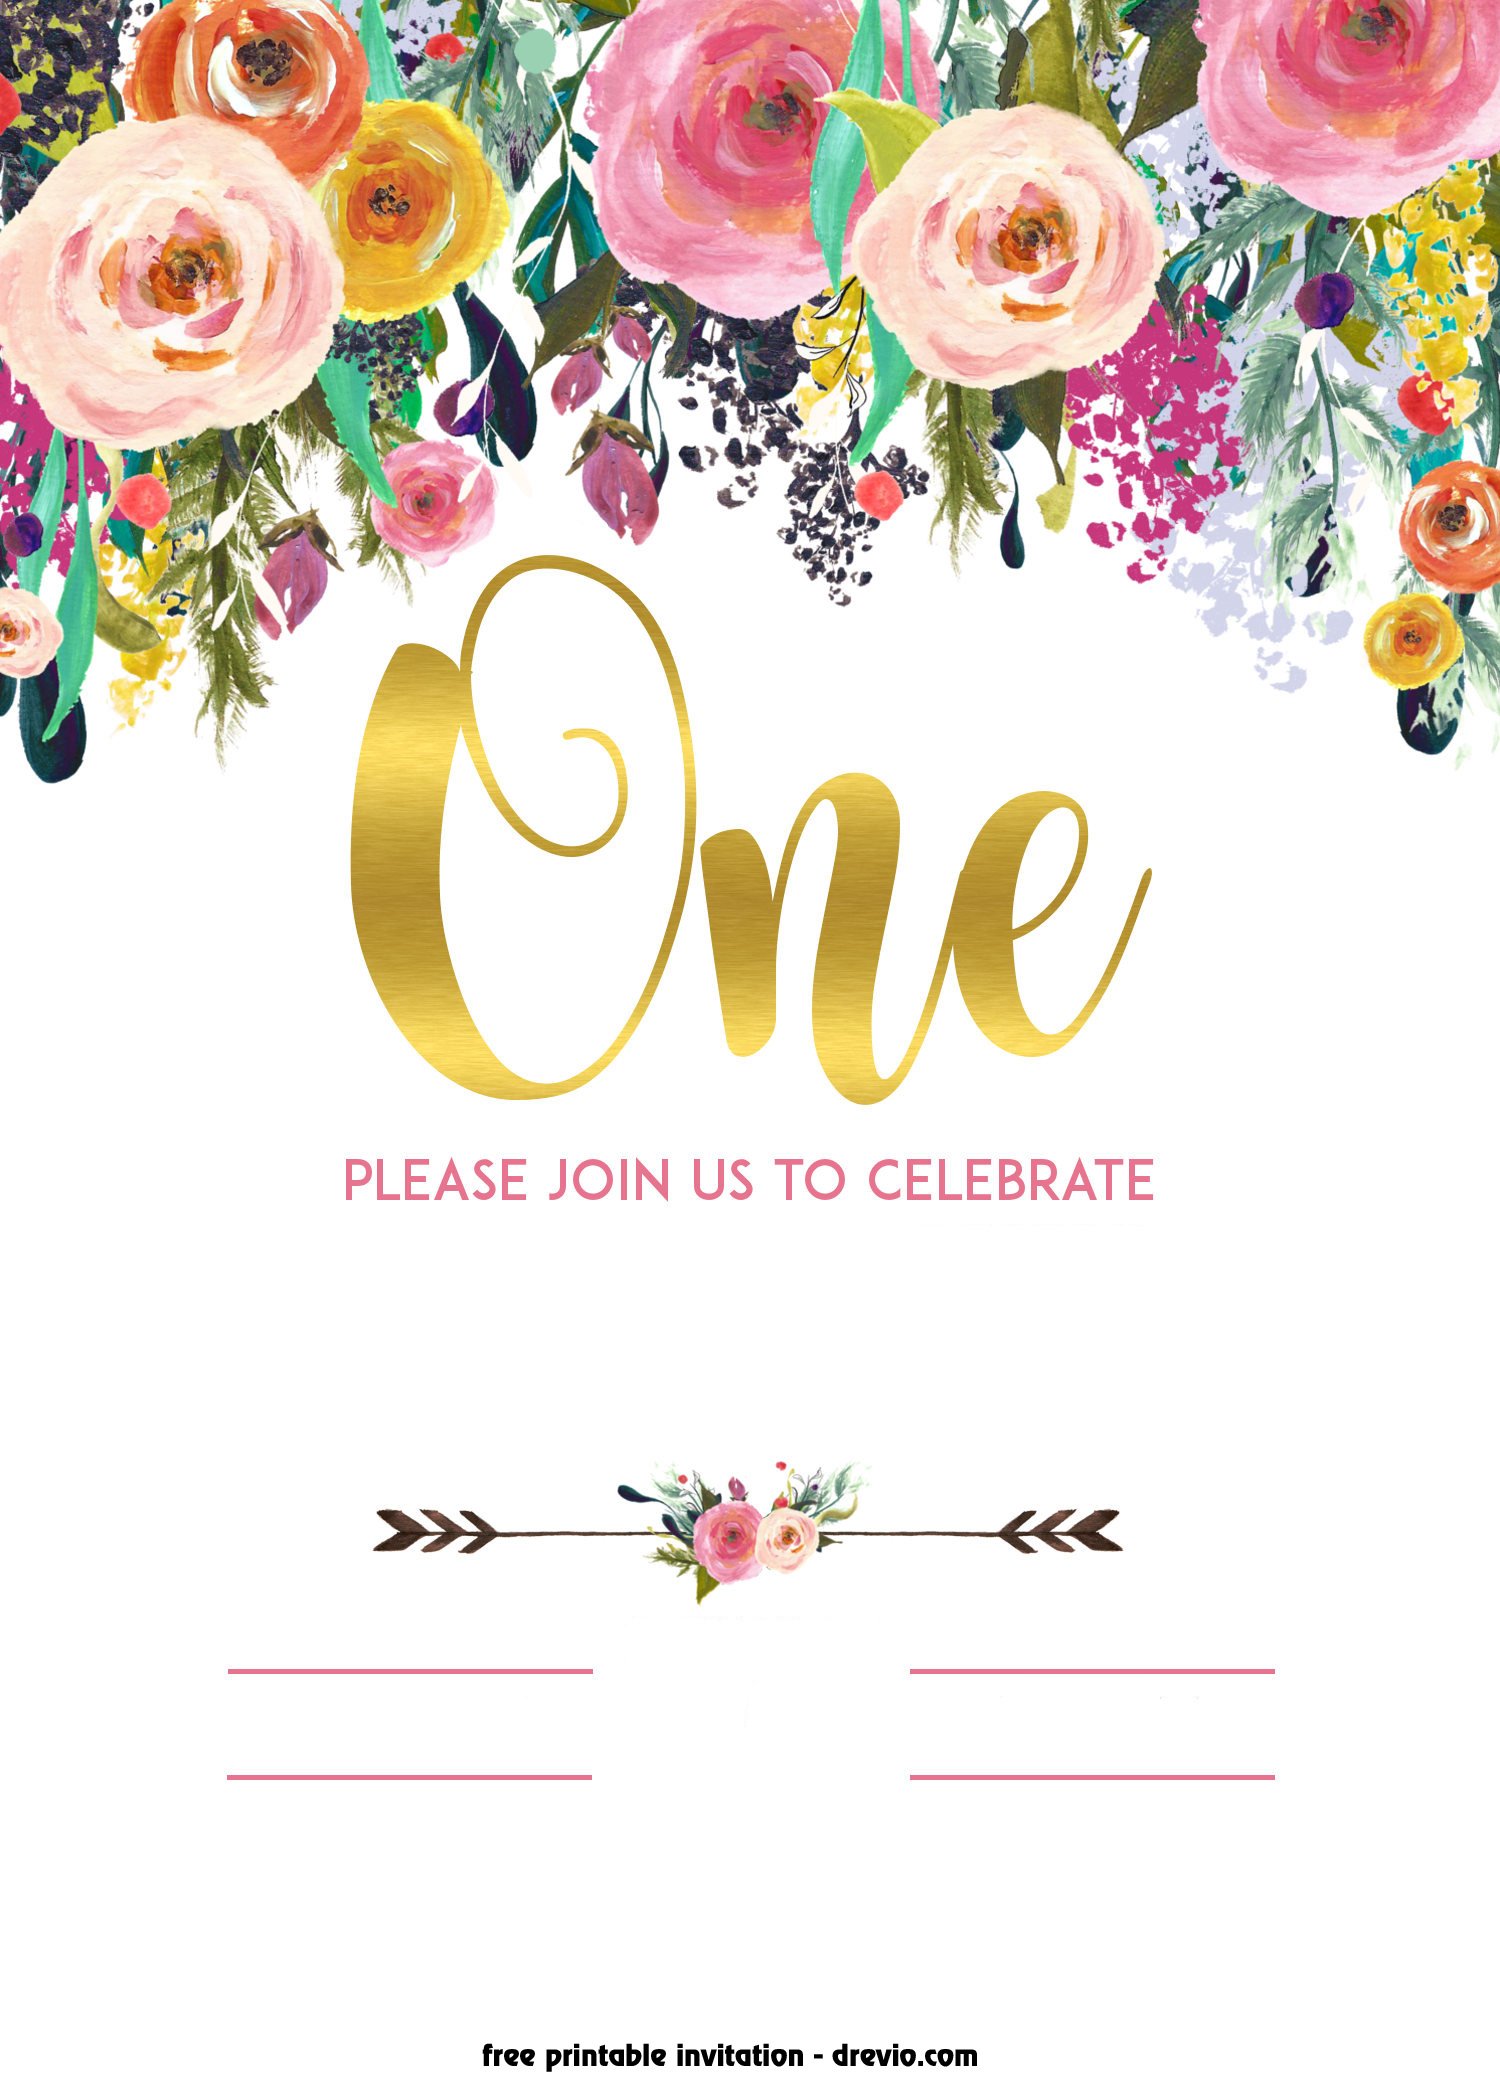 Printable Christian Invitations For Free Pdf Easter